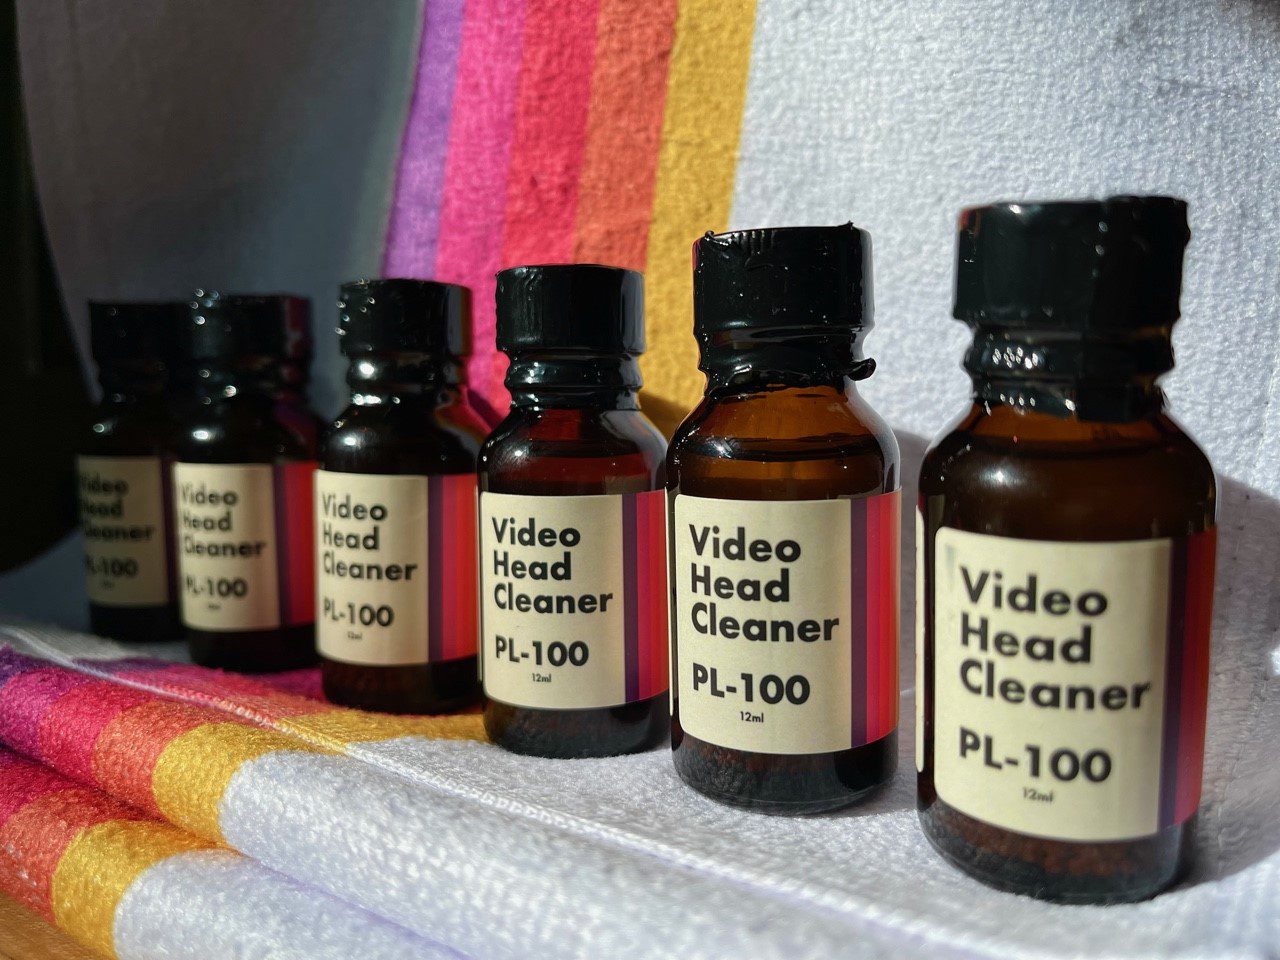 Video Head Cleaner: A New Way to Clean Your Tapes with Poppers